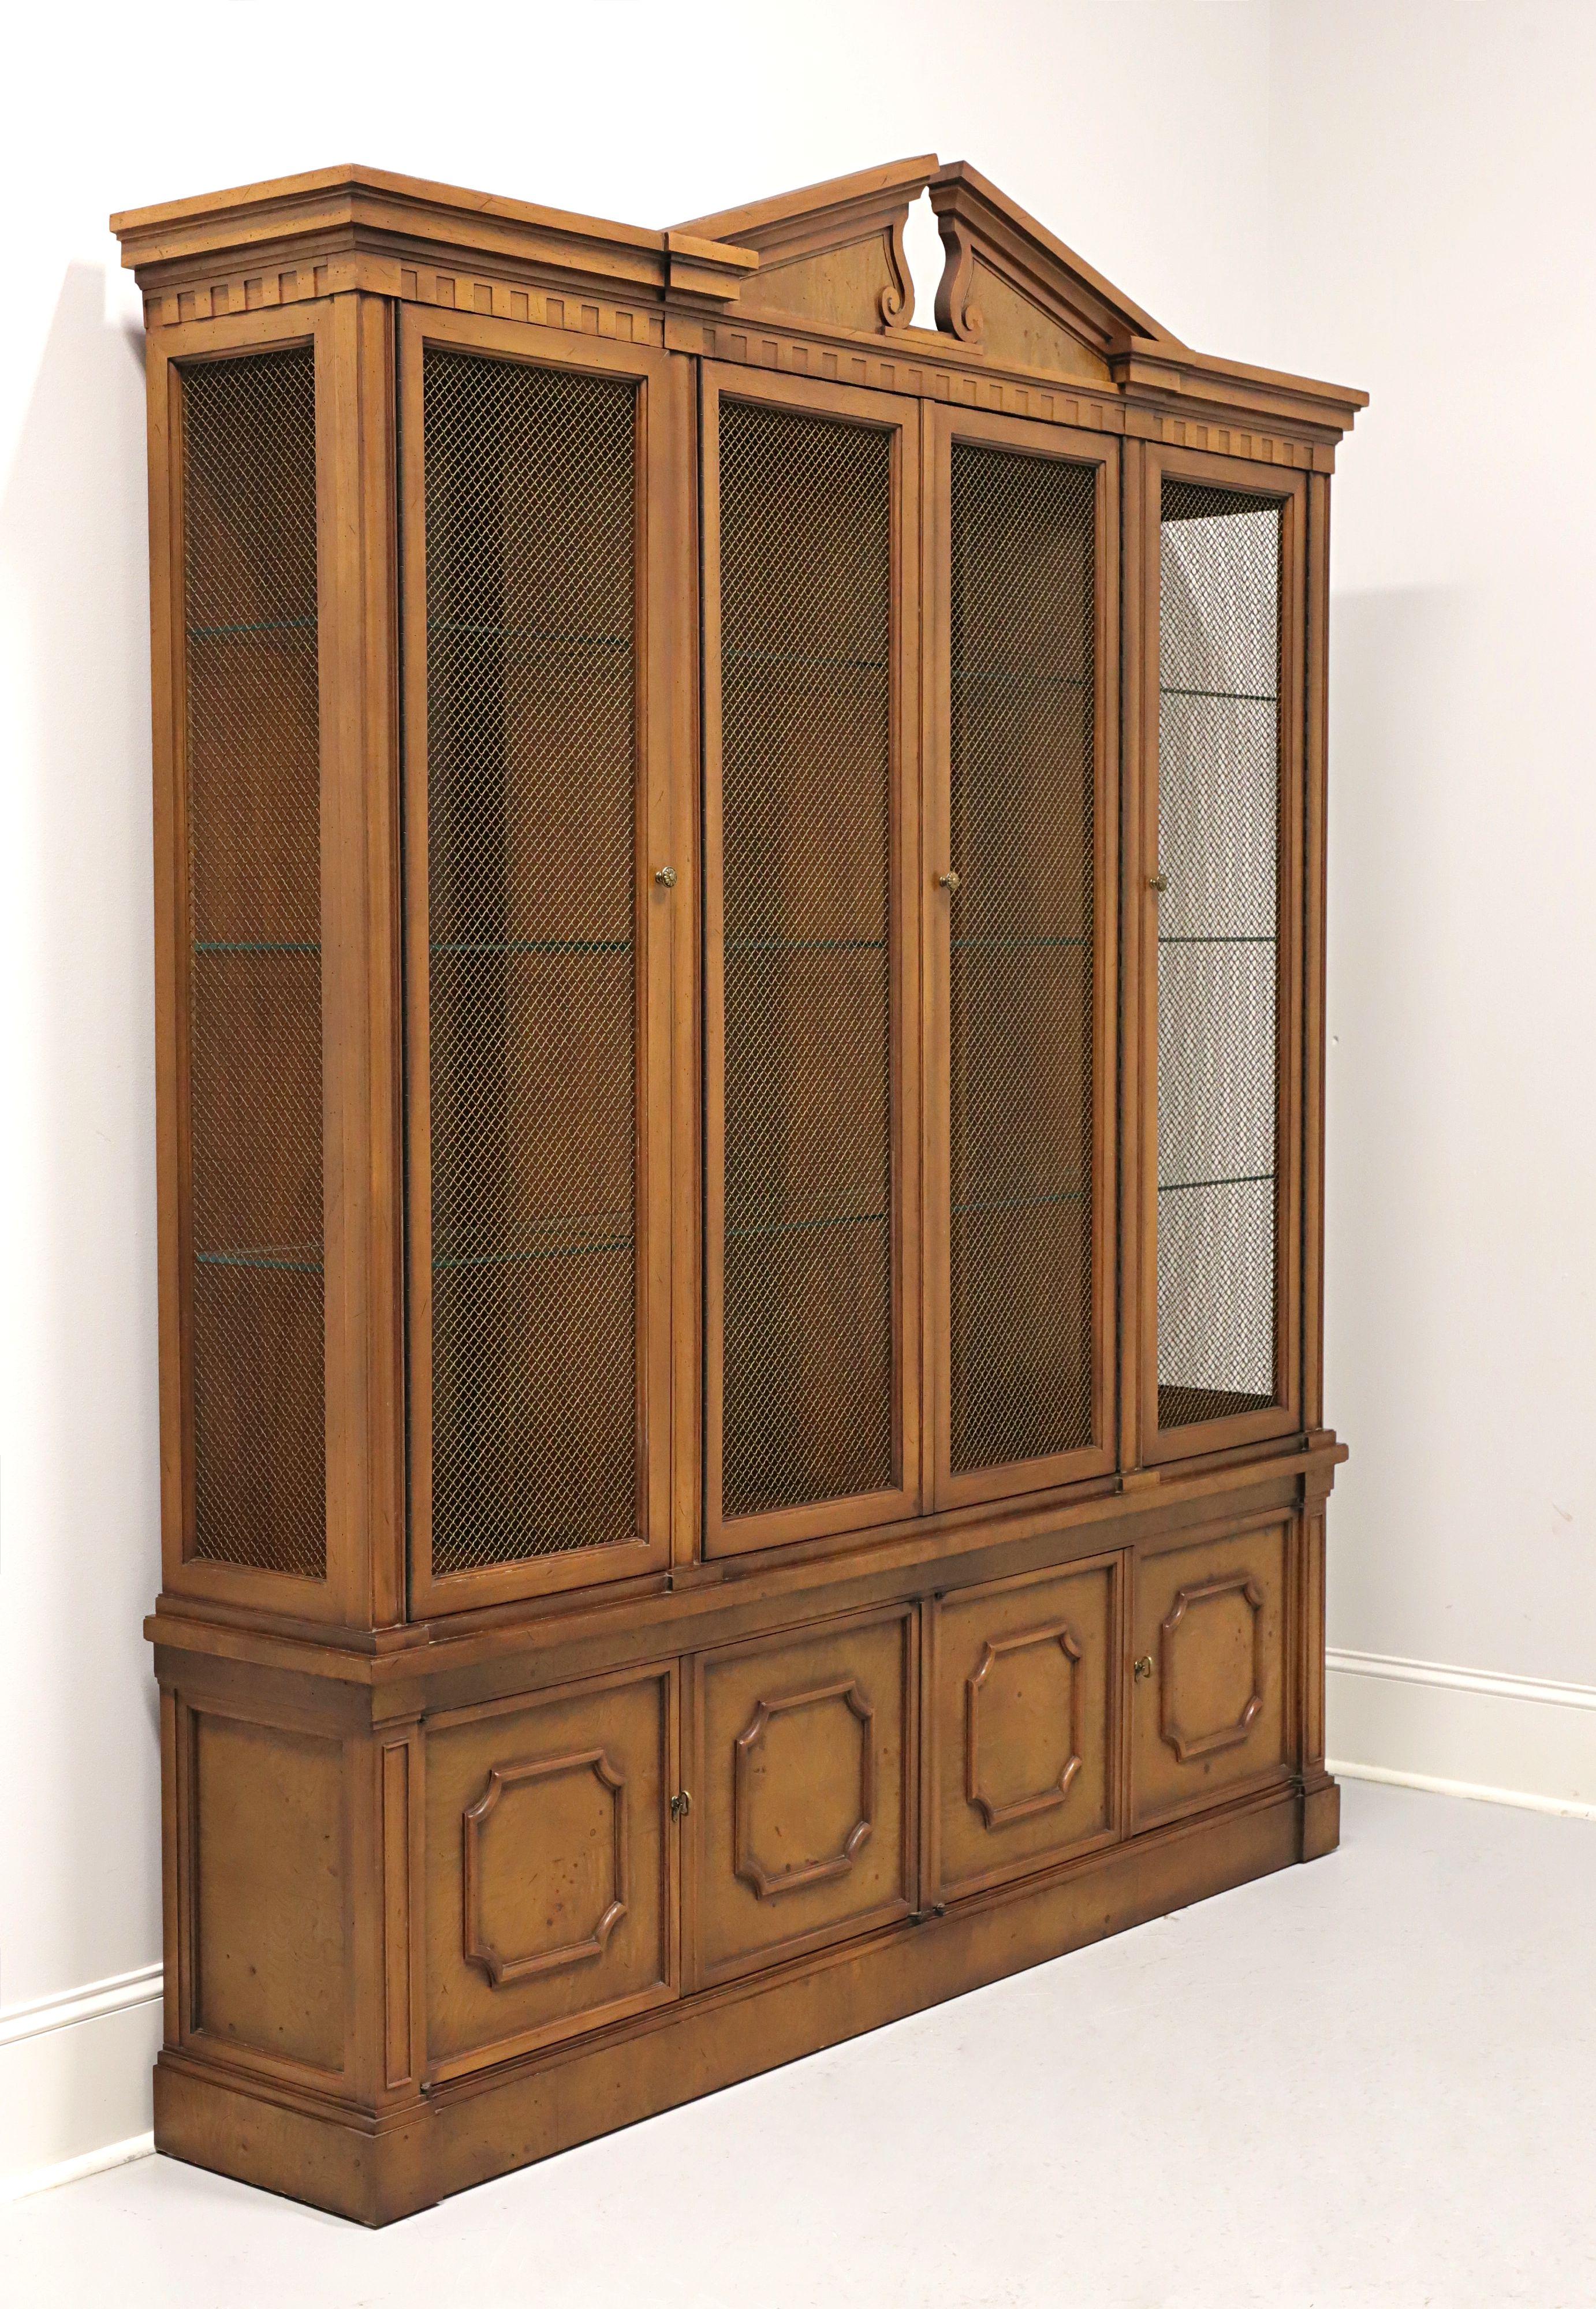 A china display cabinet in the neoclassical style by Tomlinson Furniture. Walnut with their slightly distressed antique Nutmeg finish, narrow profile design, brass hardware, pediment to top, brass wire mesh door & side panels, and raised panel lower